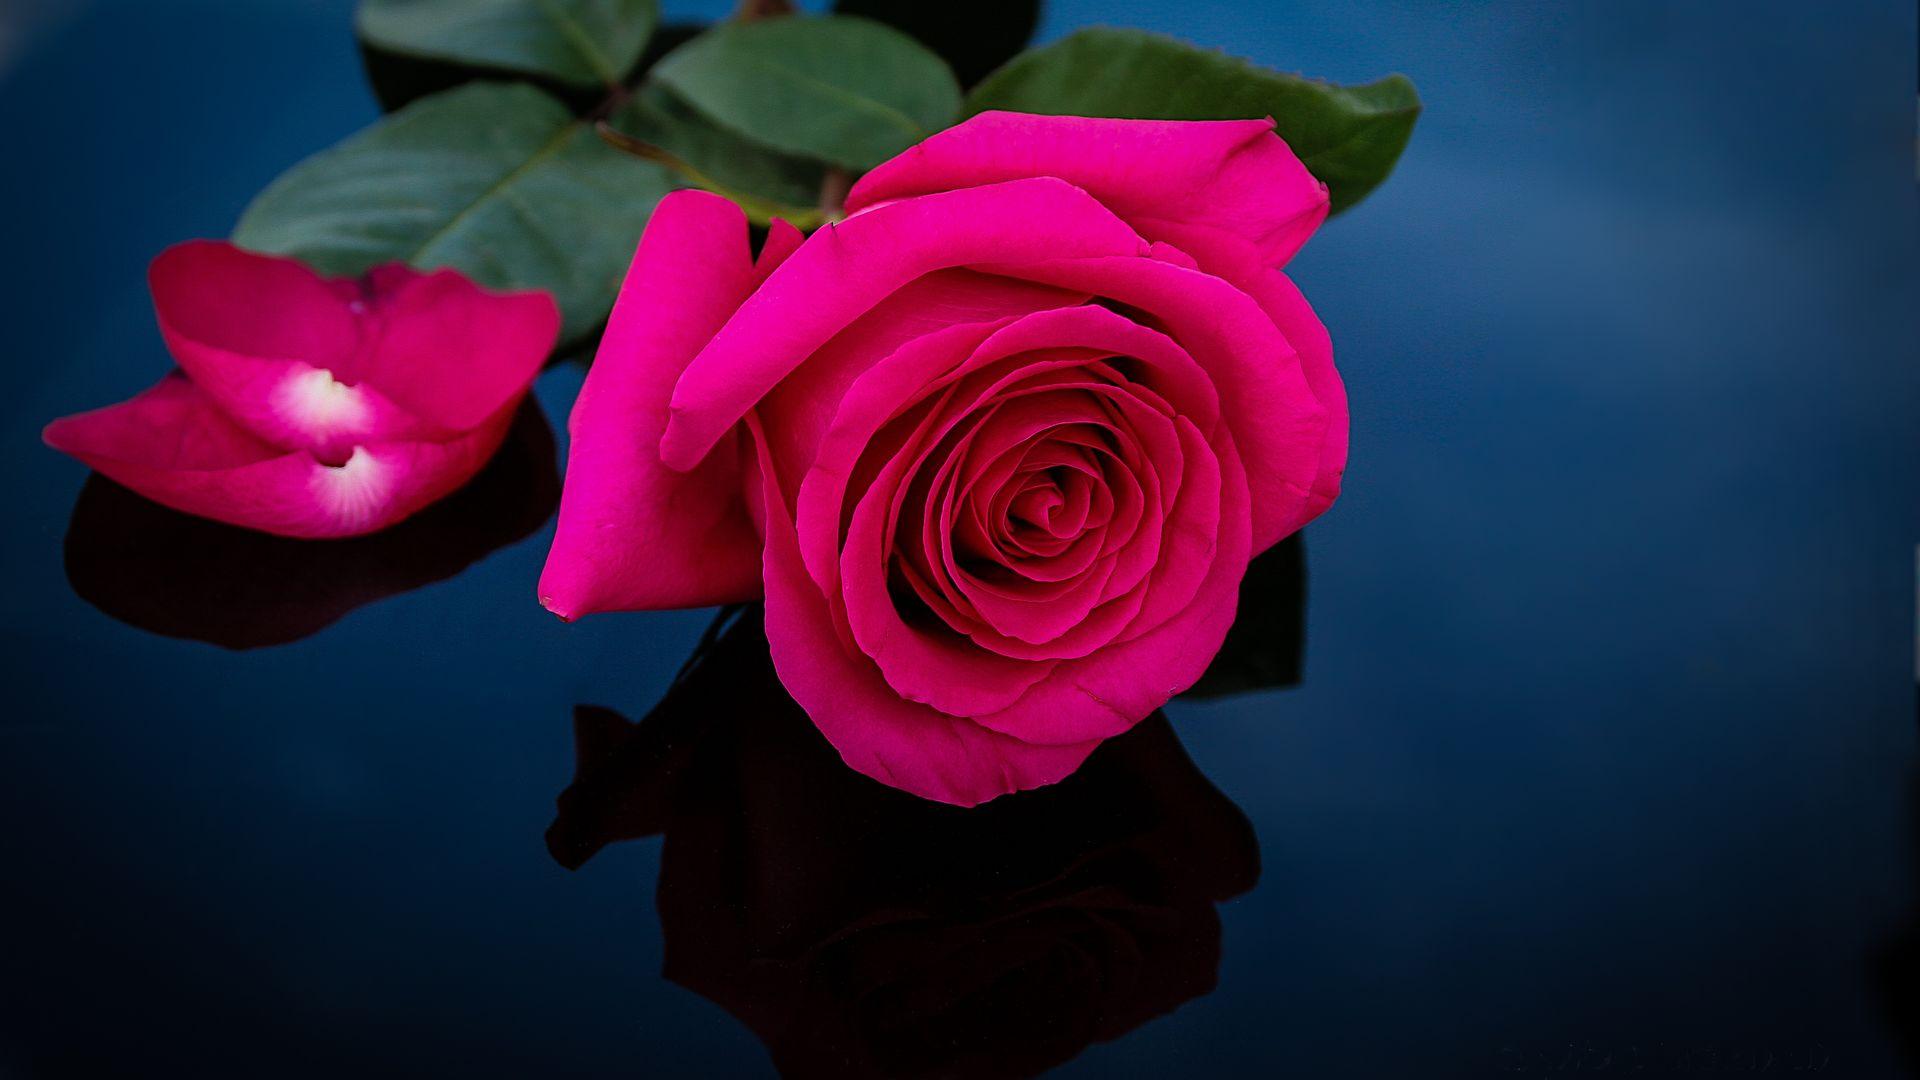 Pink Rose Photo Wallpapers - Wallpaper Cave